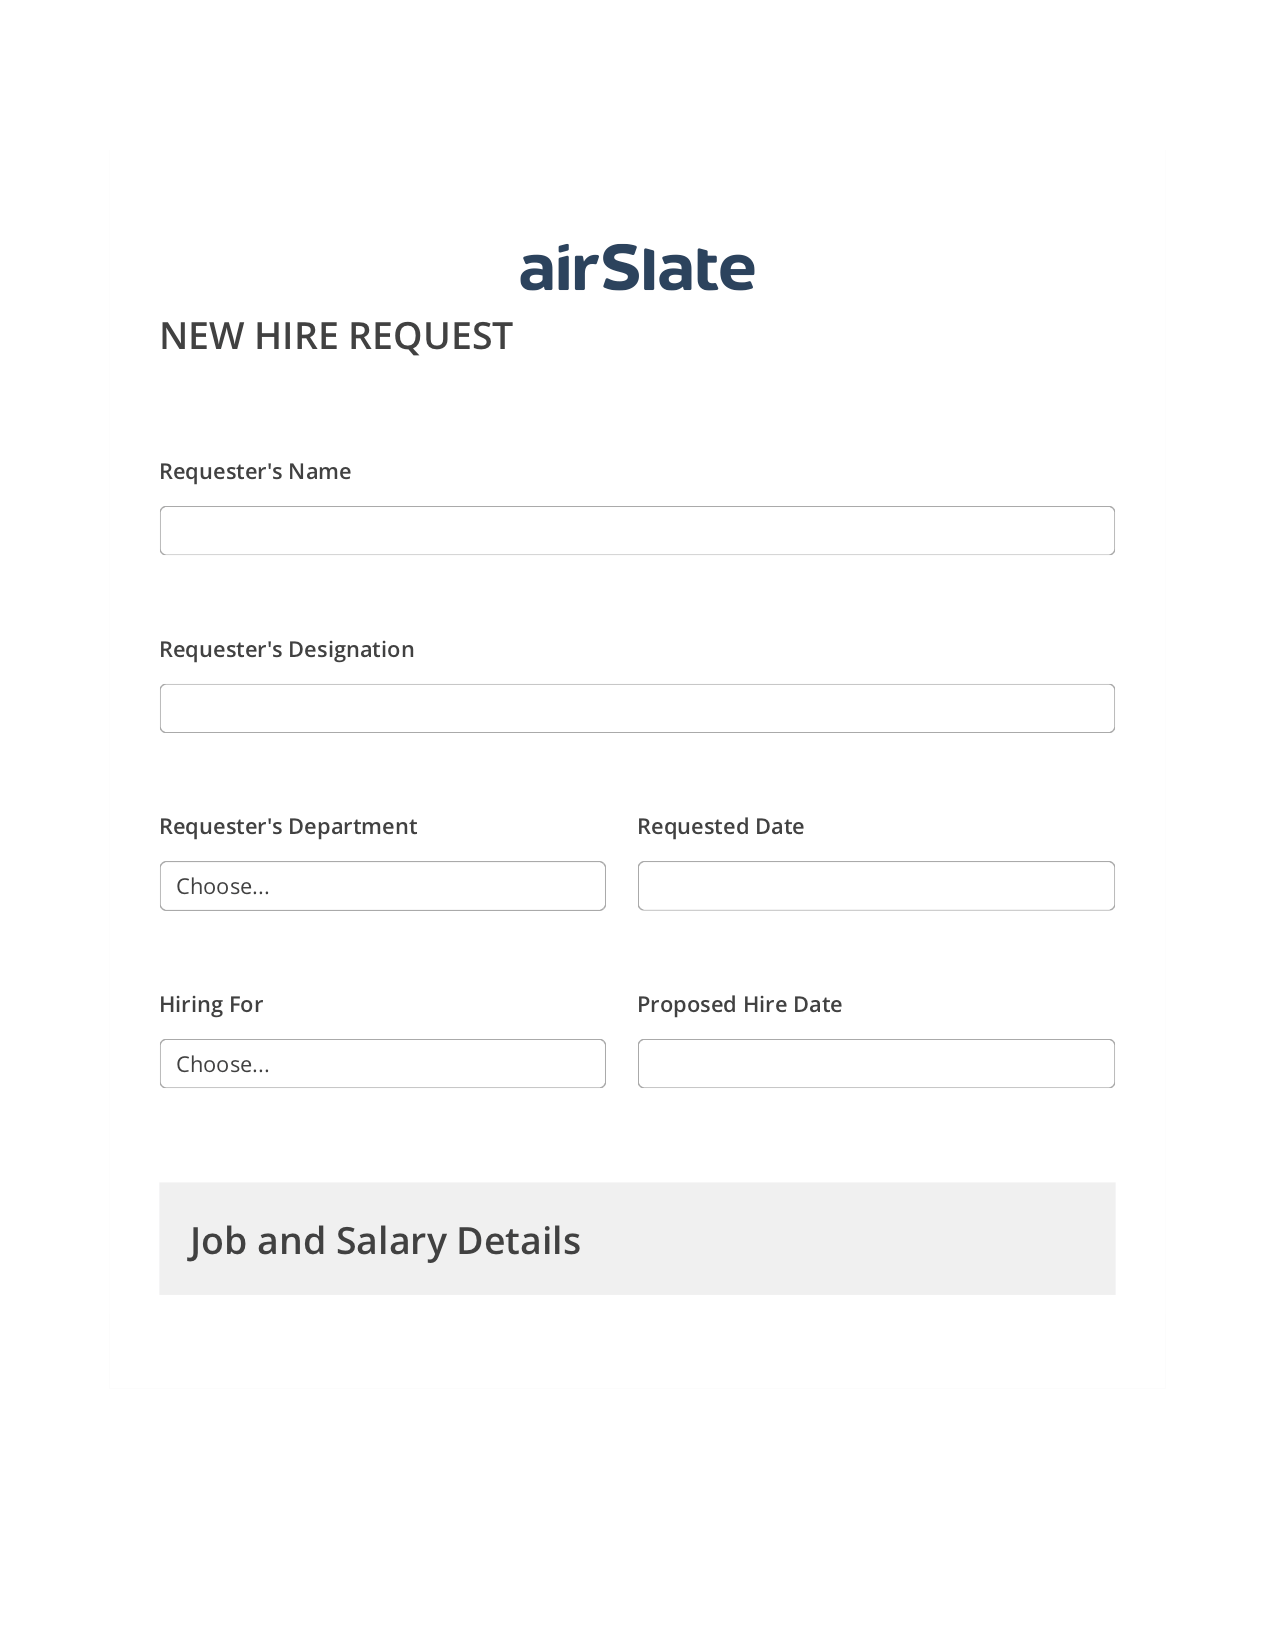 Multirole Hiring Request Workflow Pre-fill from MS Dynamics 365 Records, Remove Tags From Slate Bot, Export to Excel 365 Bot